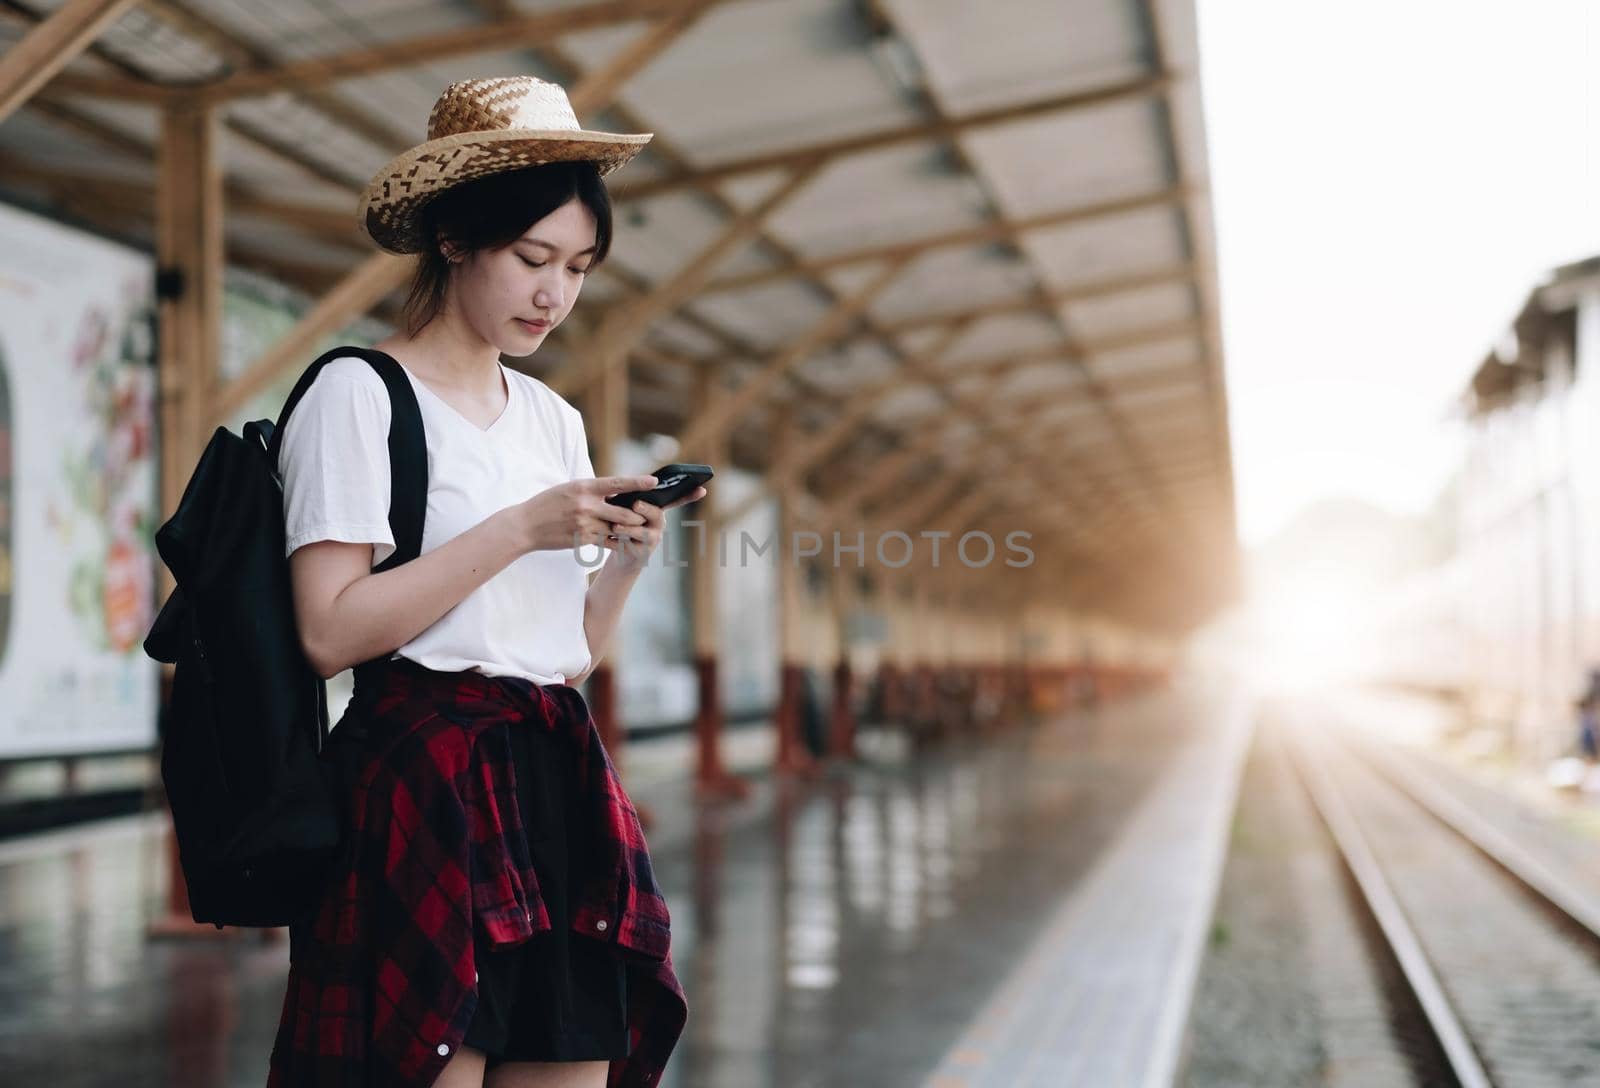 Young traveler woman looking for friend planning trip at train station. Summer and travel lifestyle concept.